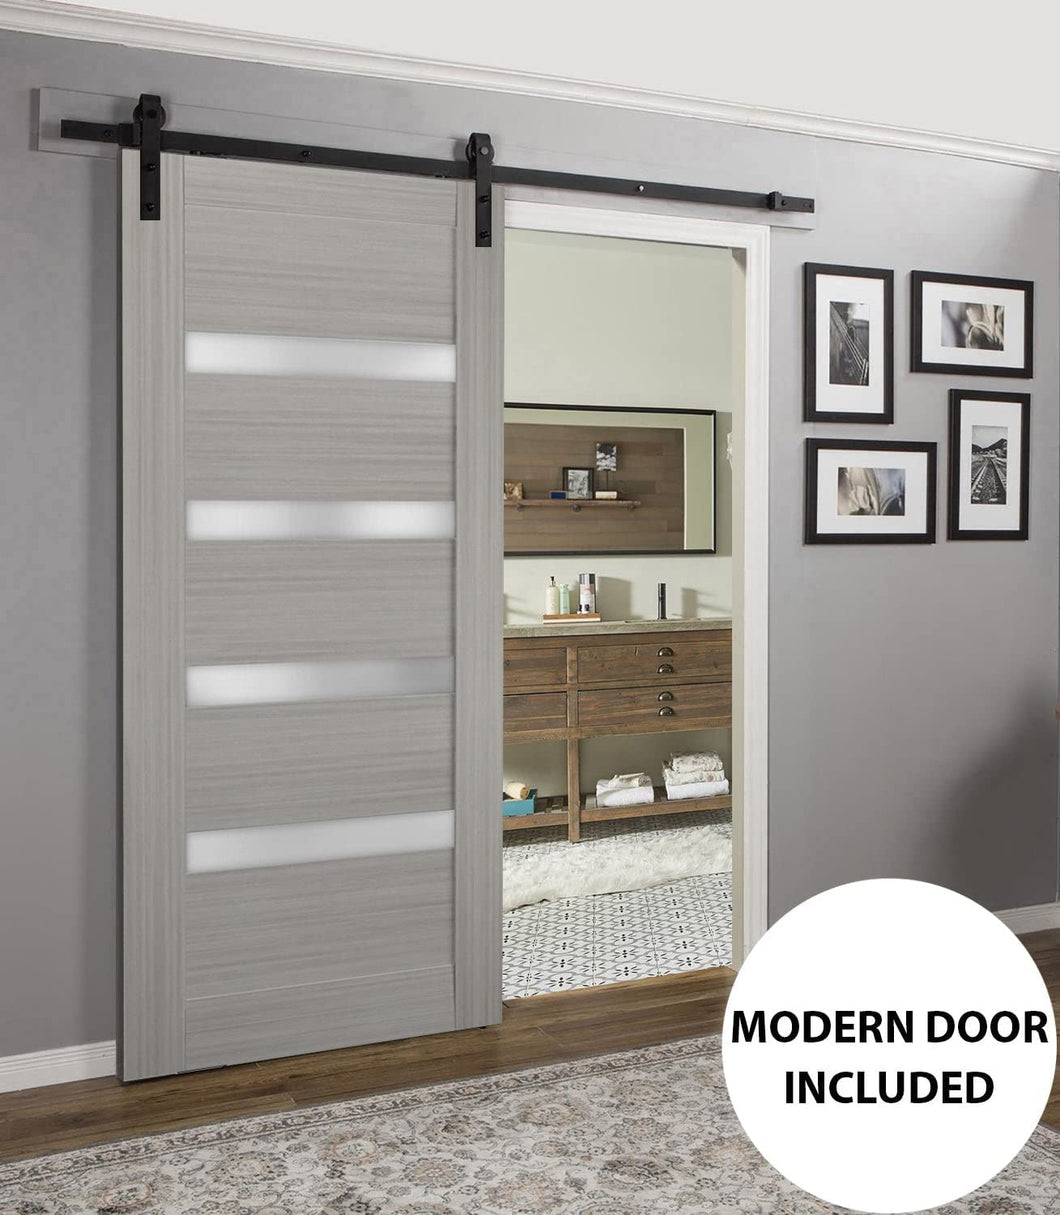 Sliding Barn Door Frosted Opaque Glass | Quadro 4113 | Grey Ash